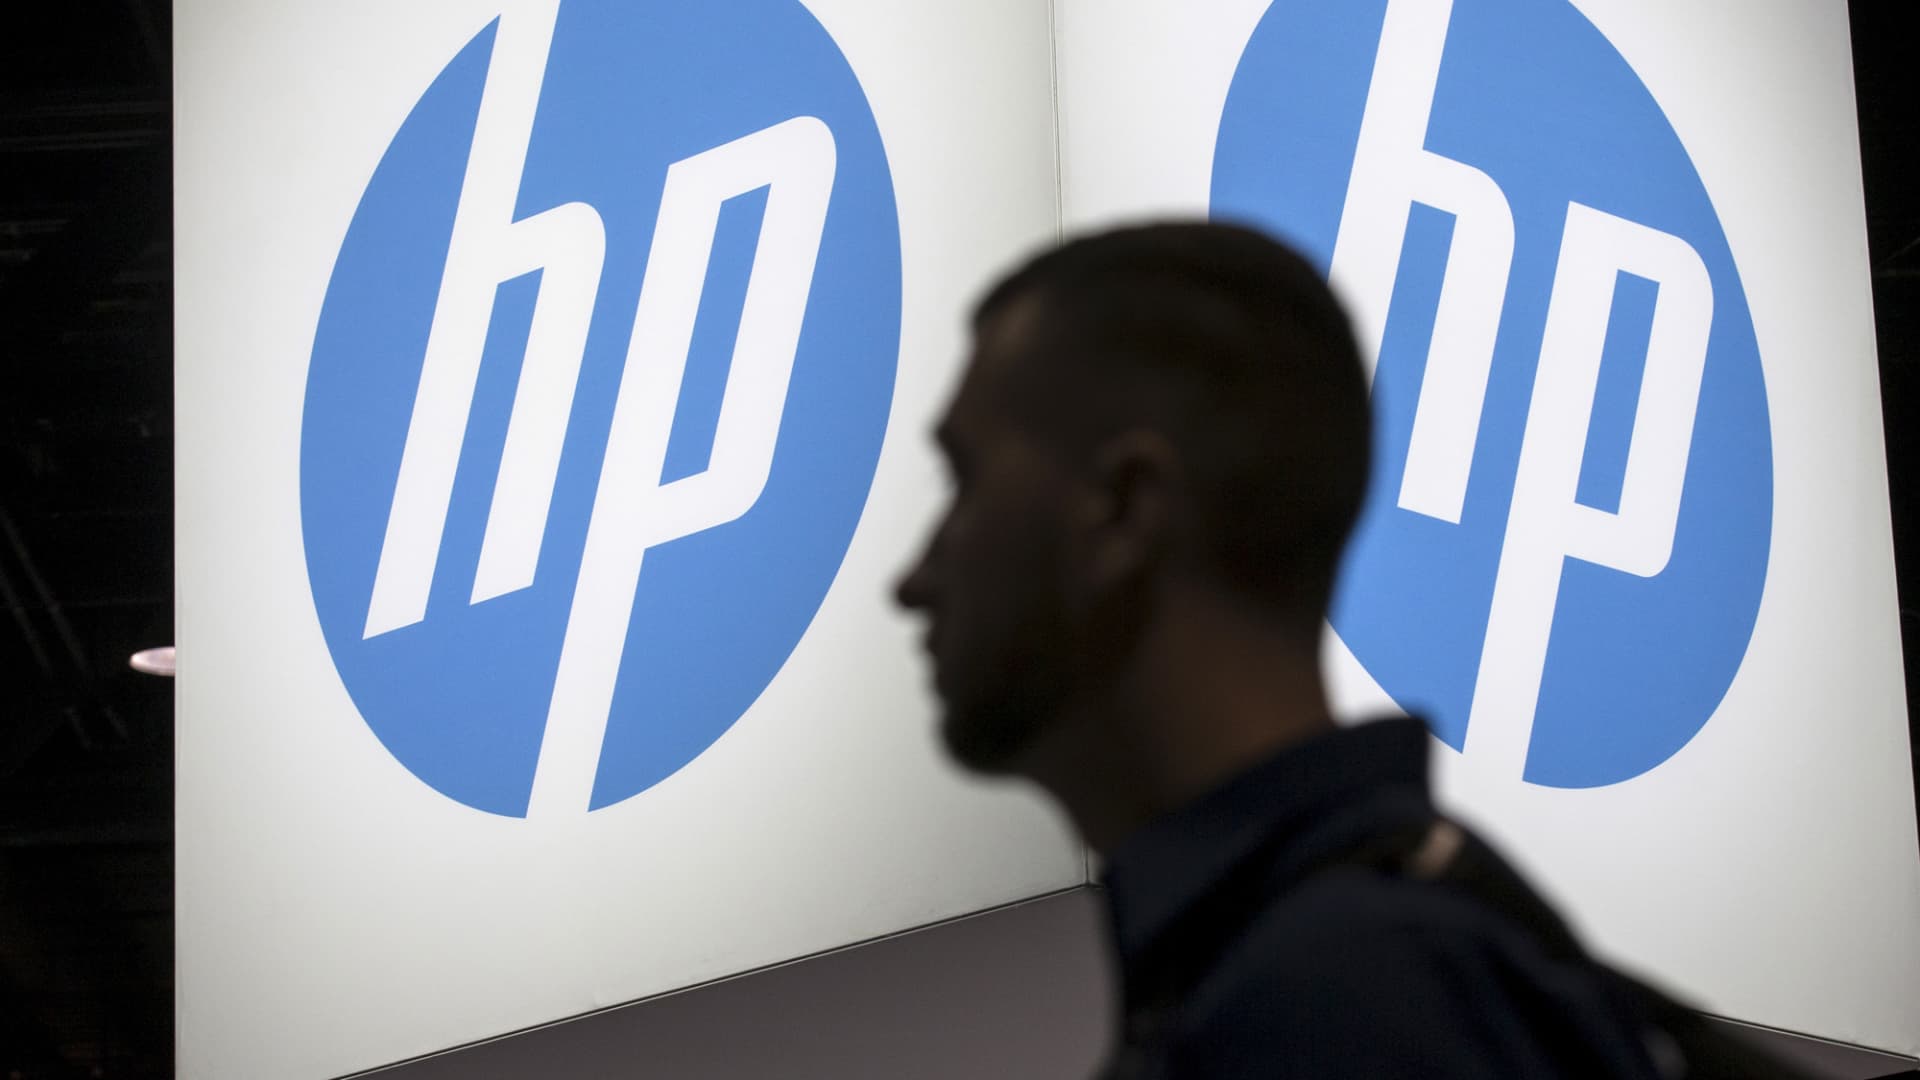 Slowing demand for PCs will limit HP’s upside, Citi says